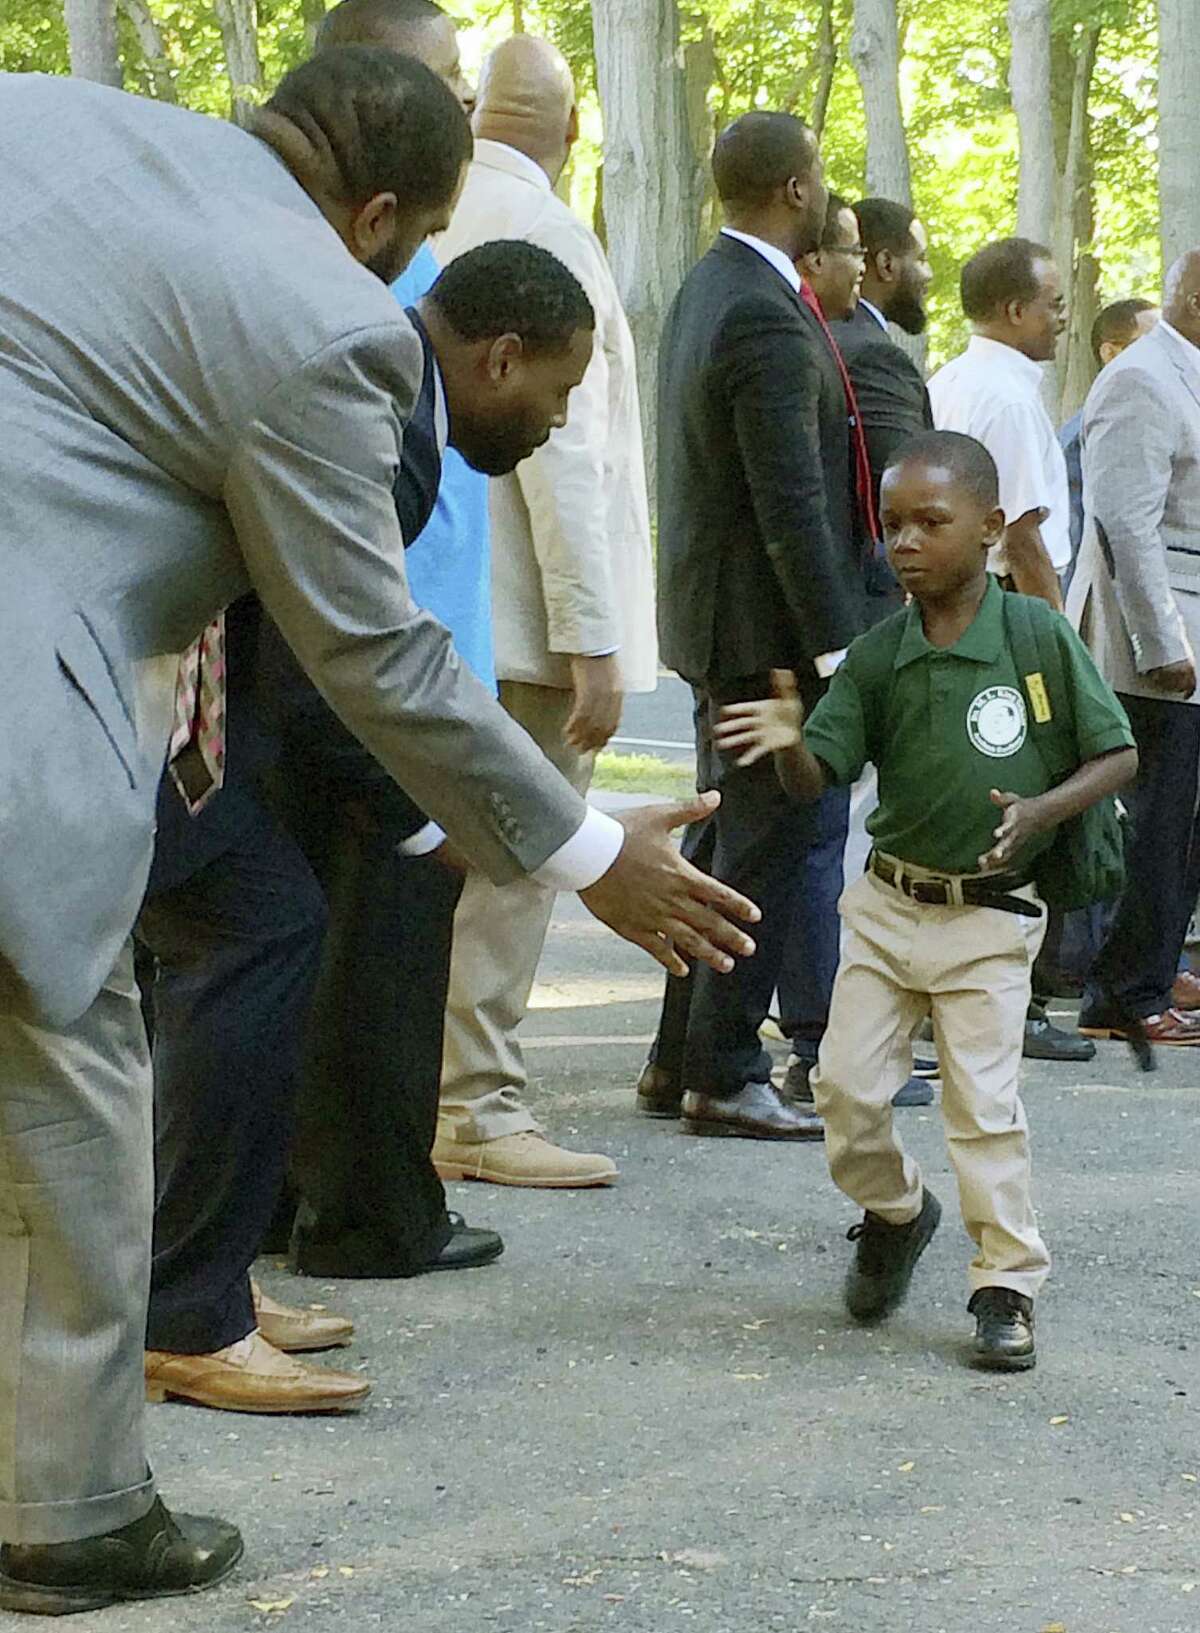 In this Aug. 30, 2016 photo, black professional men from the community greet students arriving for the first day of school at Martin Luther King Jr. Elementary School in Hartford, Conn. Similar welcome ceremonies have been staged for students from minority communities in cities around the country including Atlanta, Boston and Seattle.